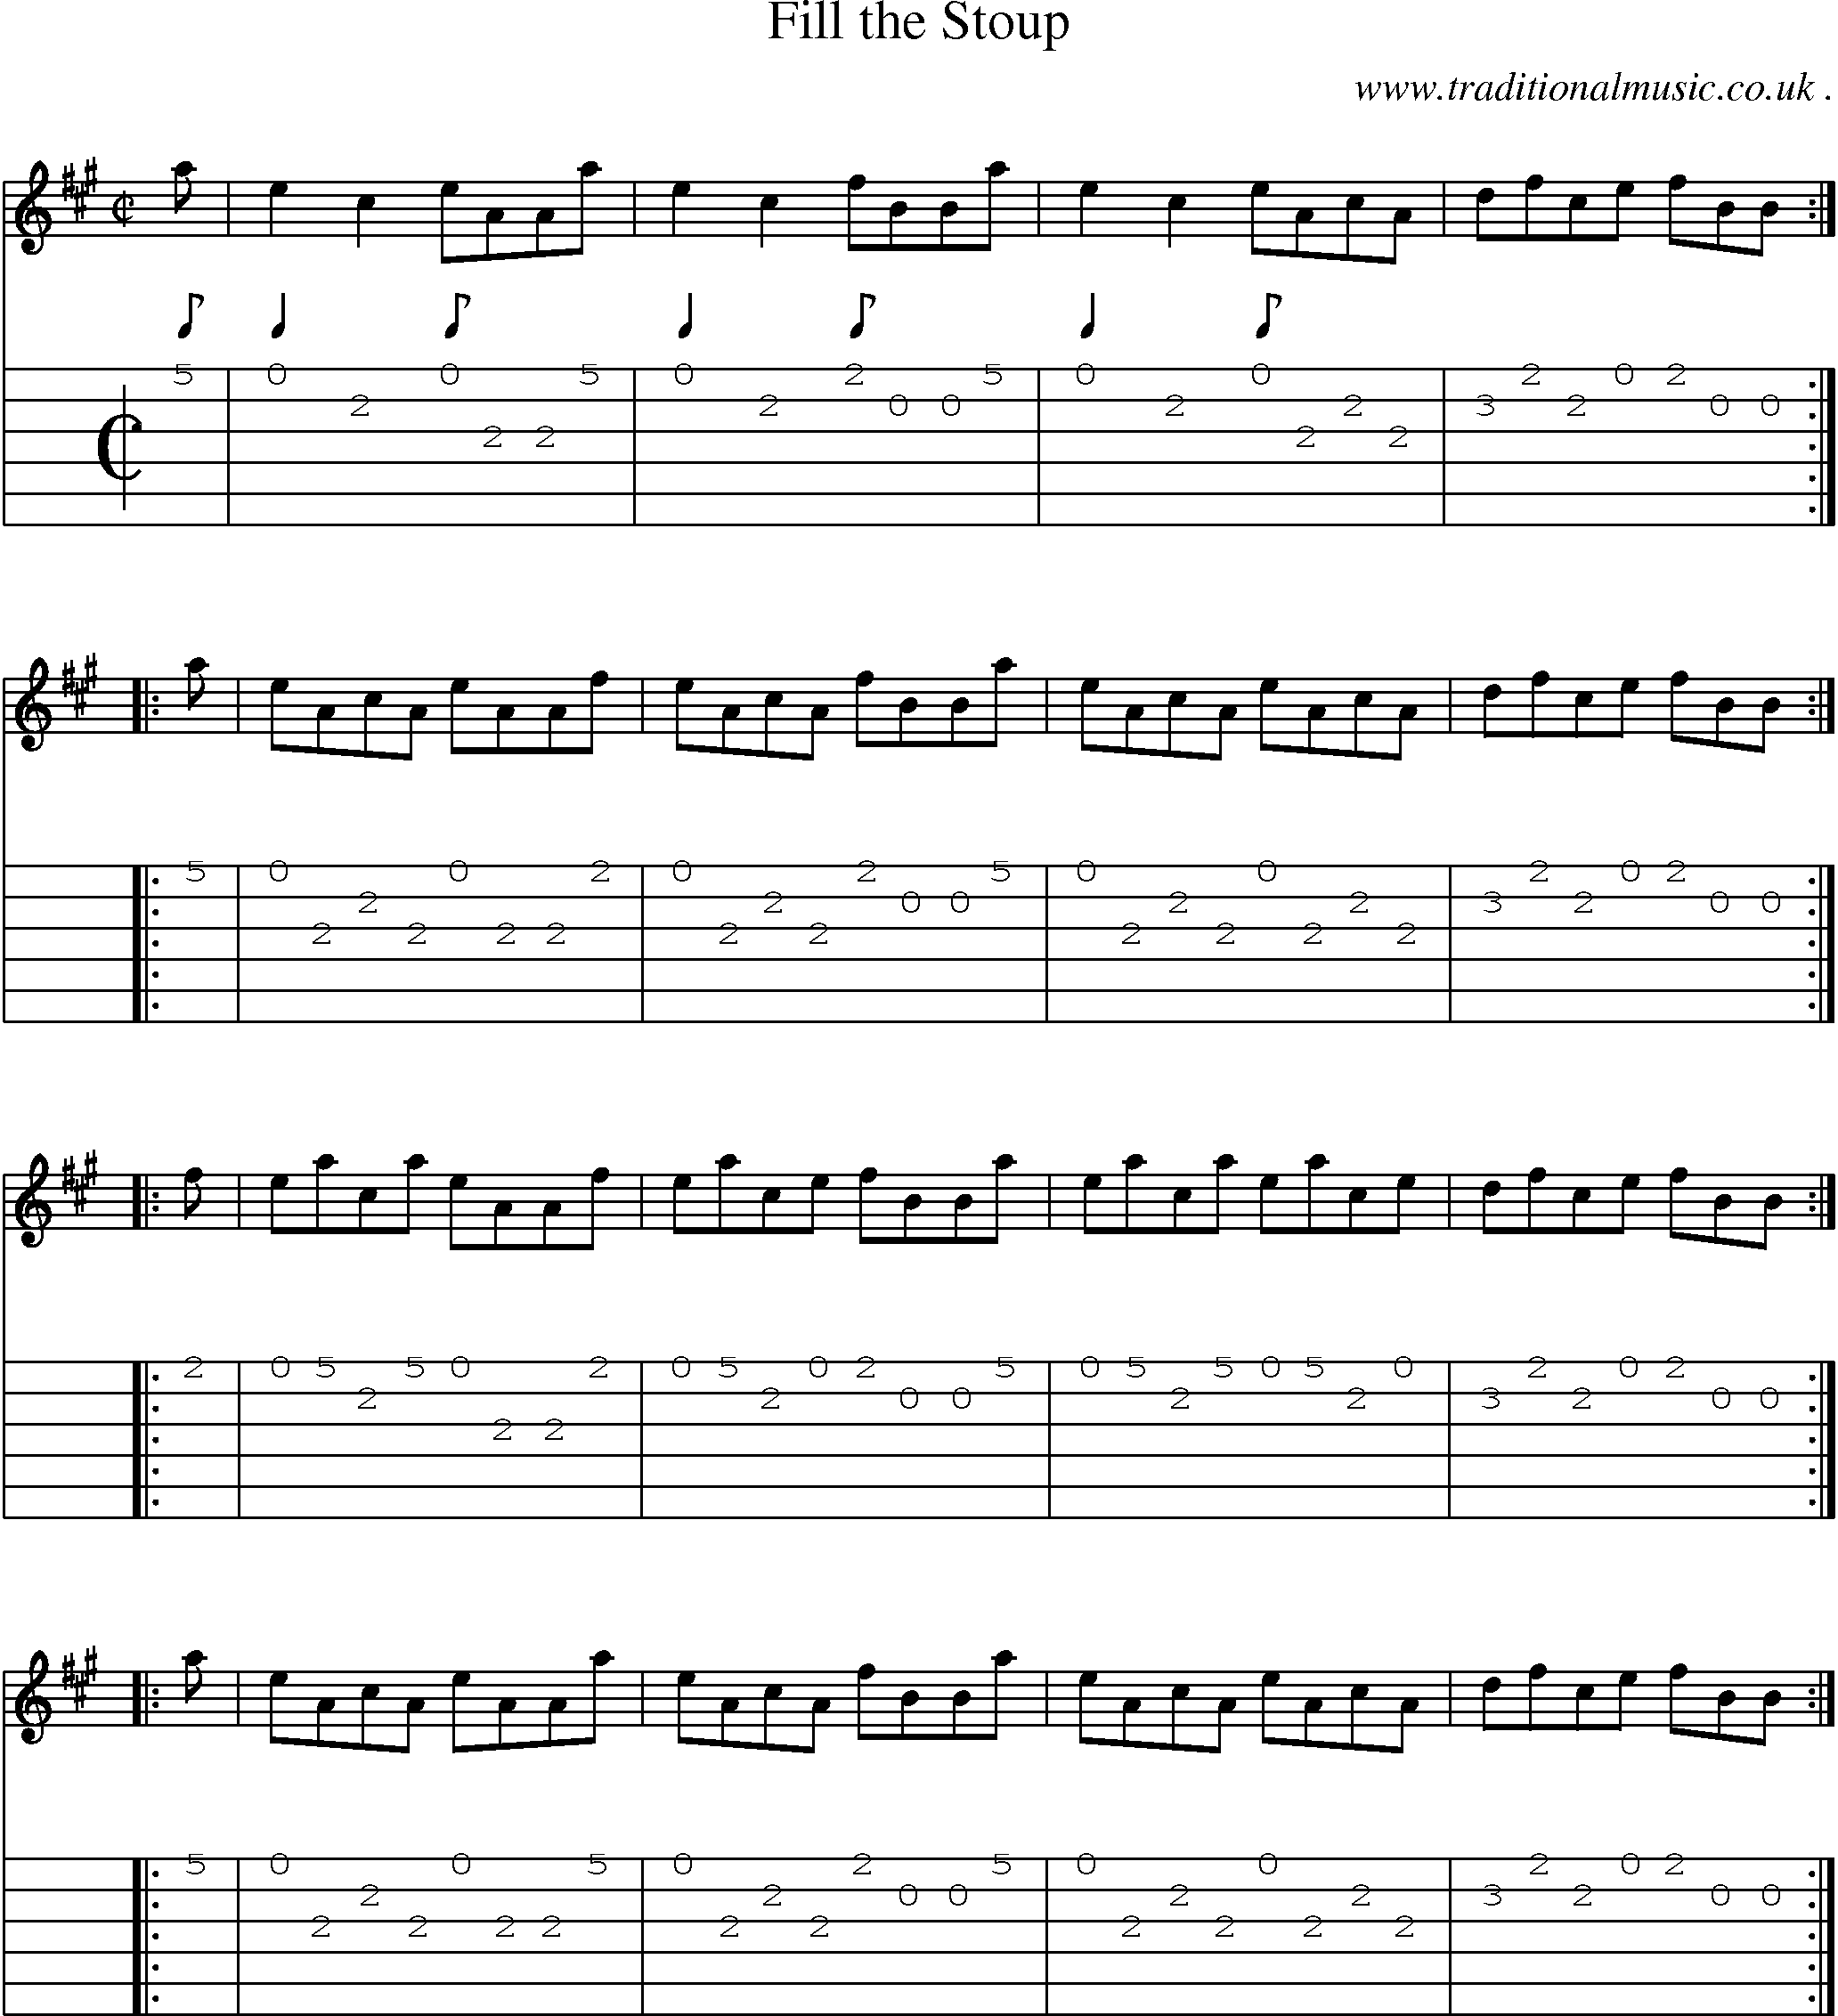 Sheet-music  score, Chords and Guitar Tabs for Fill The Stoup